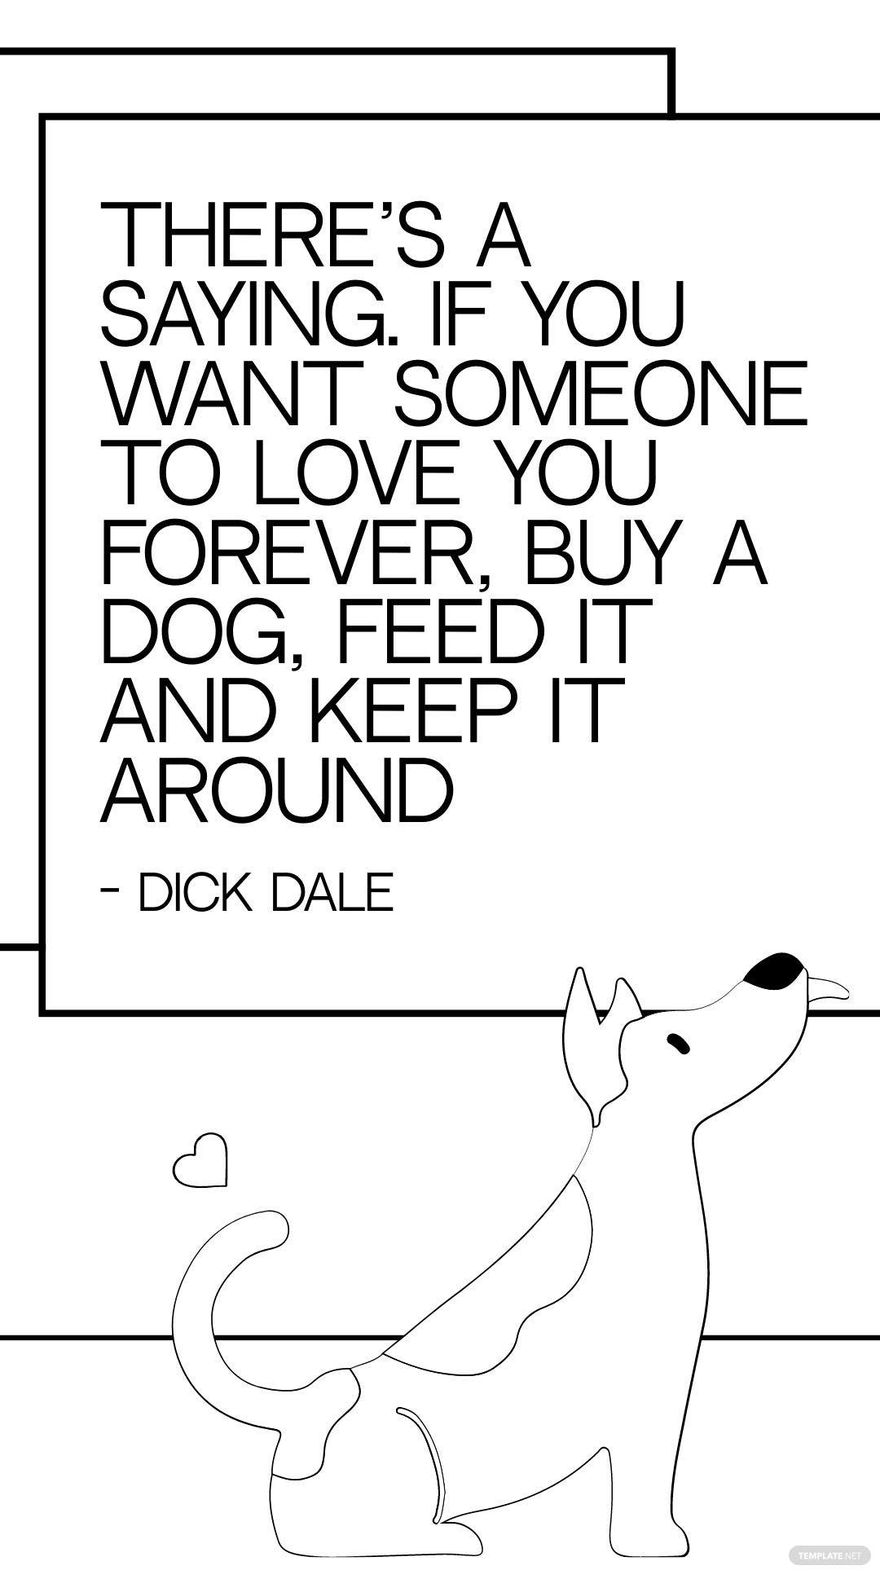 Dick Dale - There's a saying. If you want someone to love you forever, buy a dog, feed it and keep it around